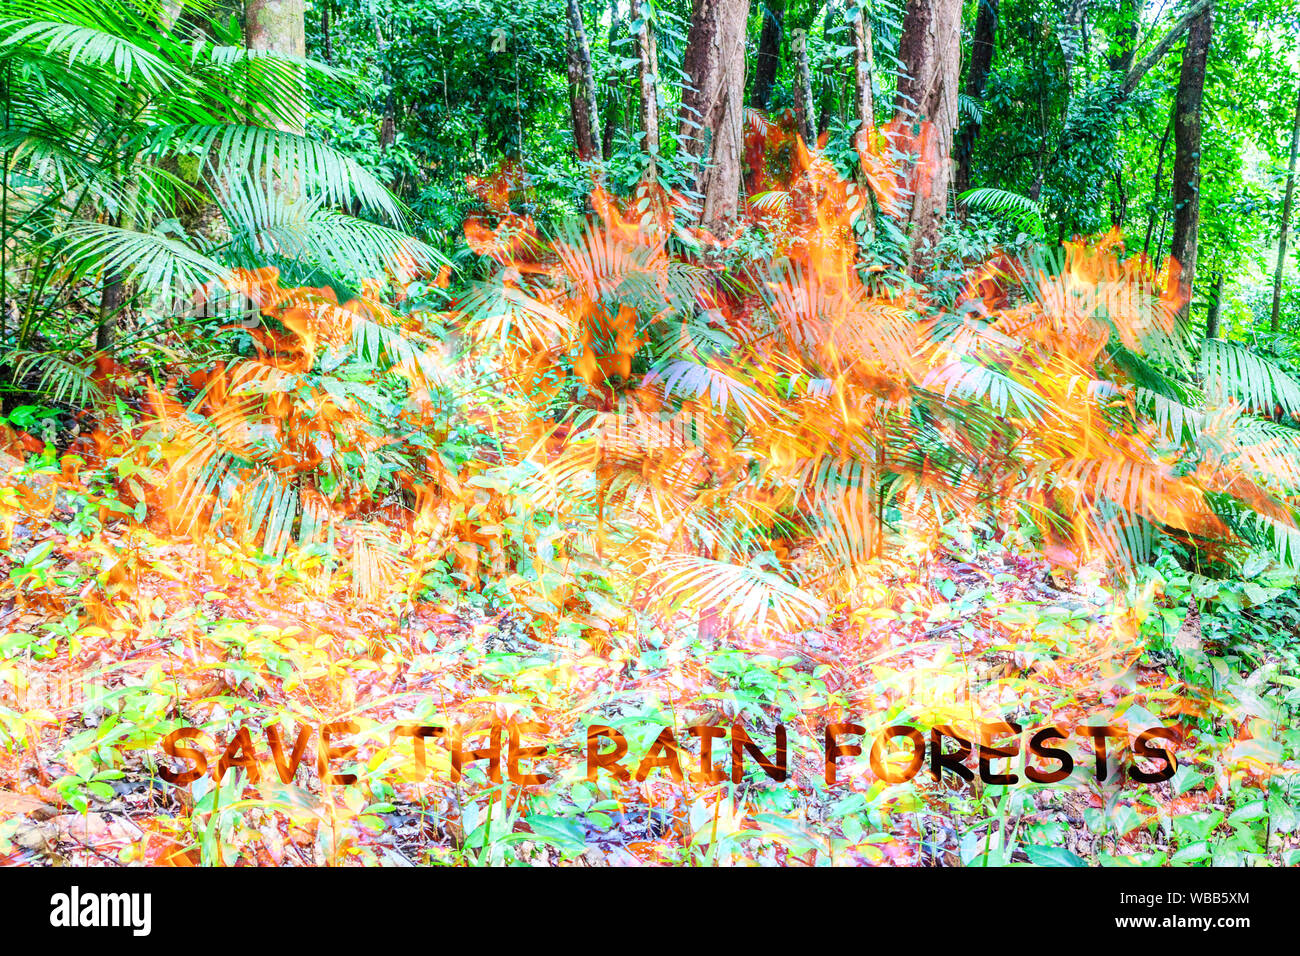 Illustration of flames in a forest signifying rain forest destruction and global warming Stock Photo